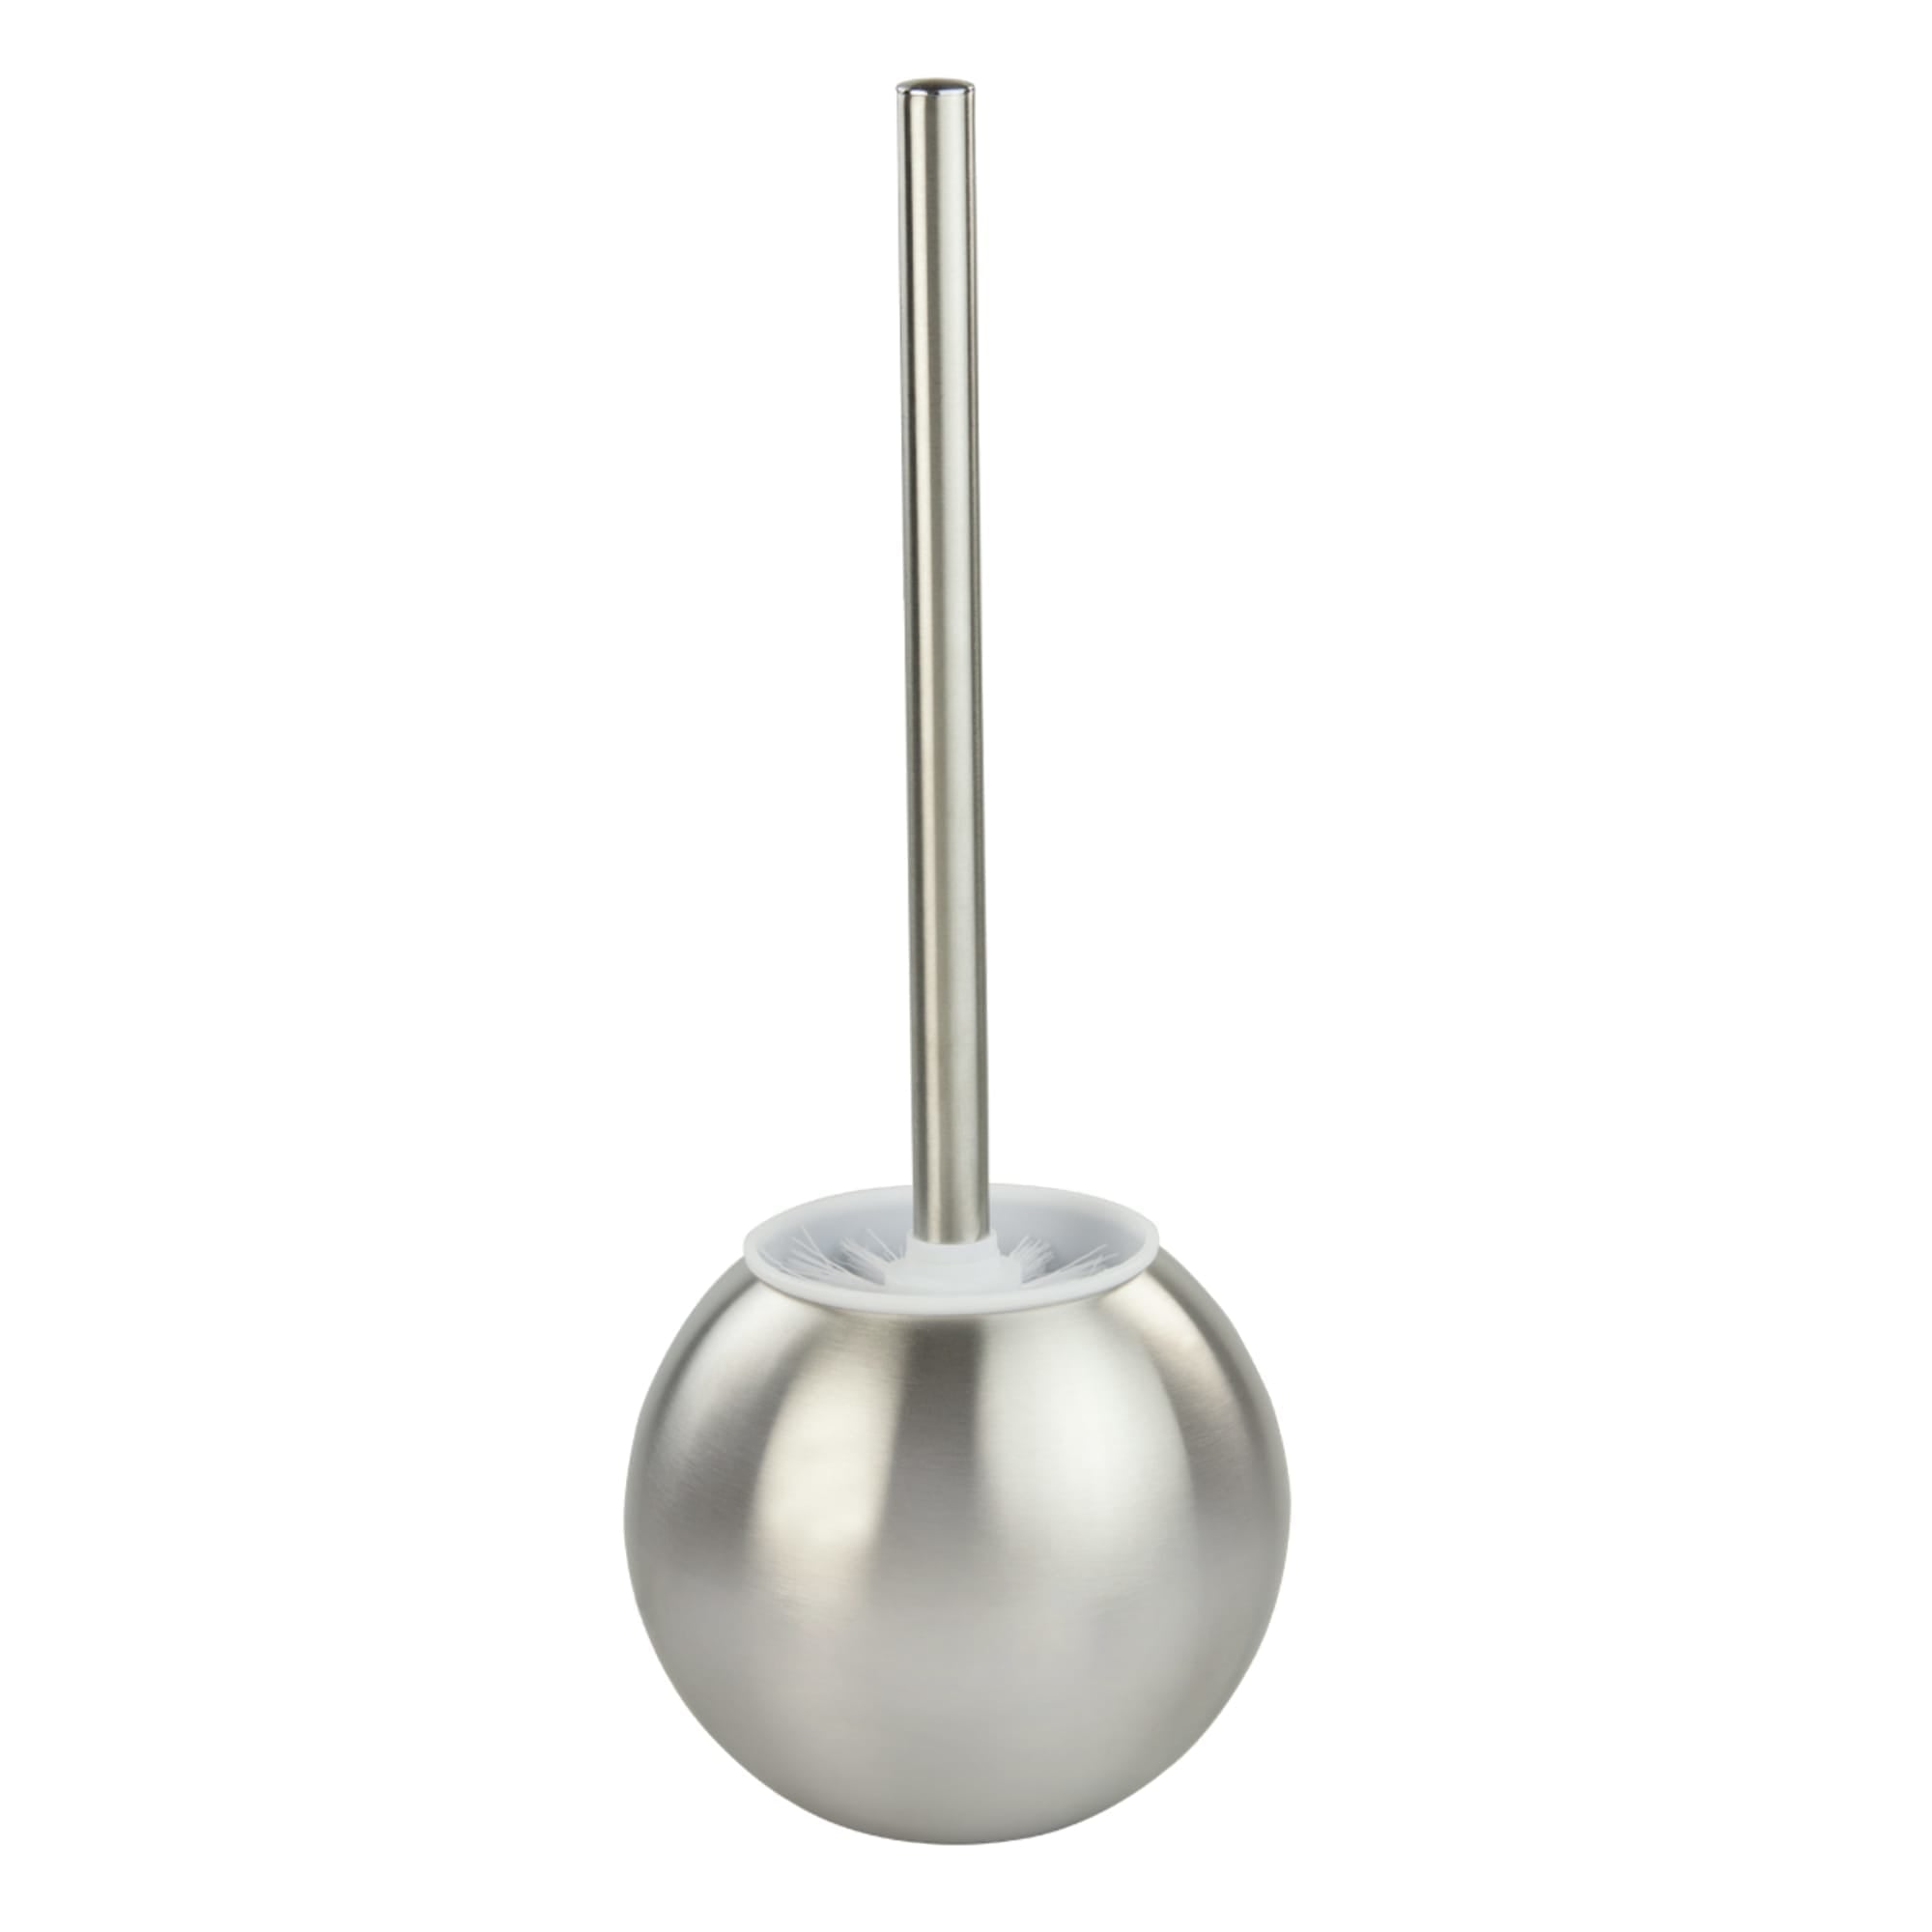 Home Basics Hide-Away Toilet Brush with Round Stainless Steel Hygienic Holder, Silver $10.00 EACH, CASE PACK OF 12